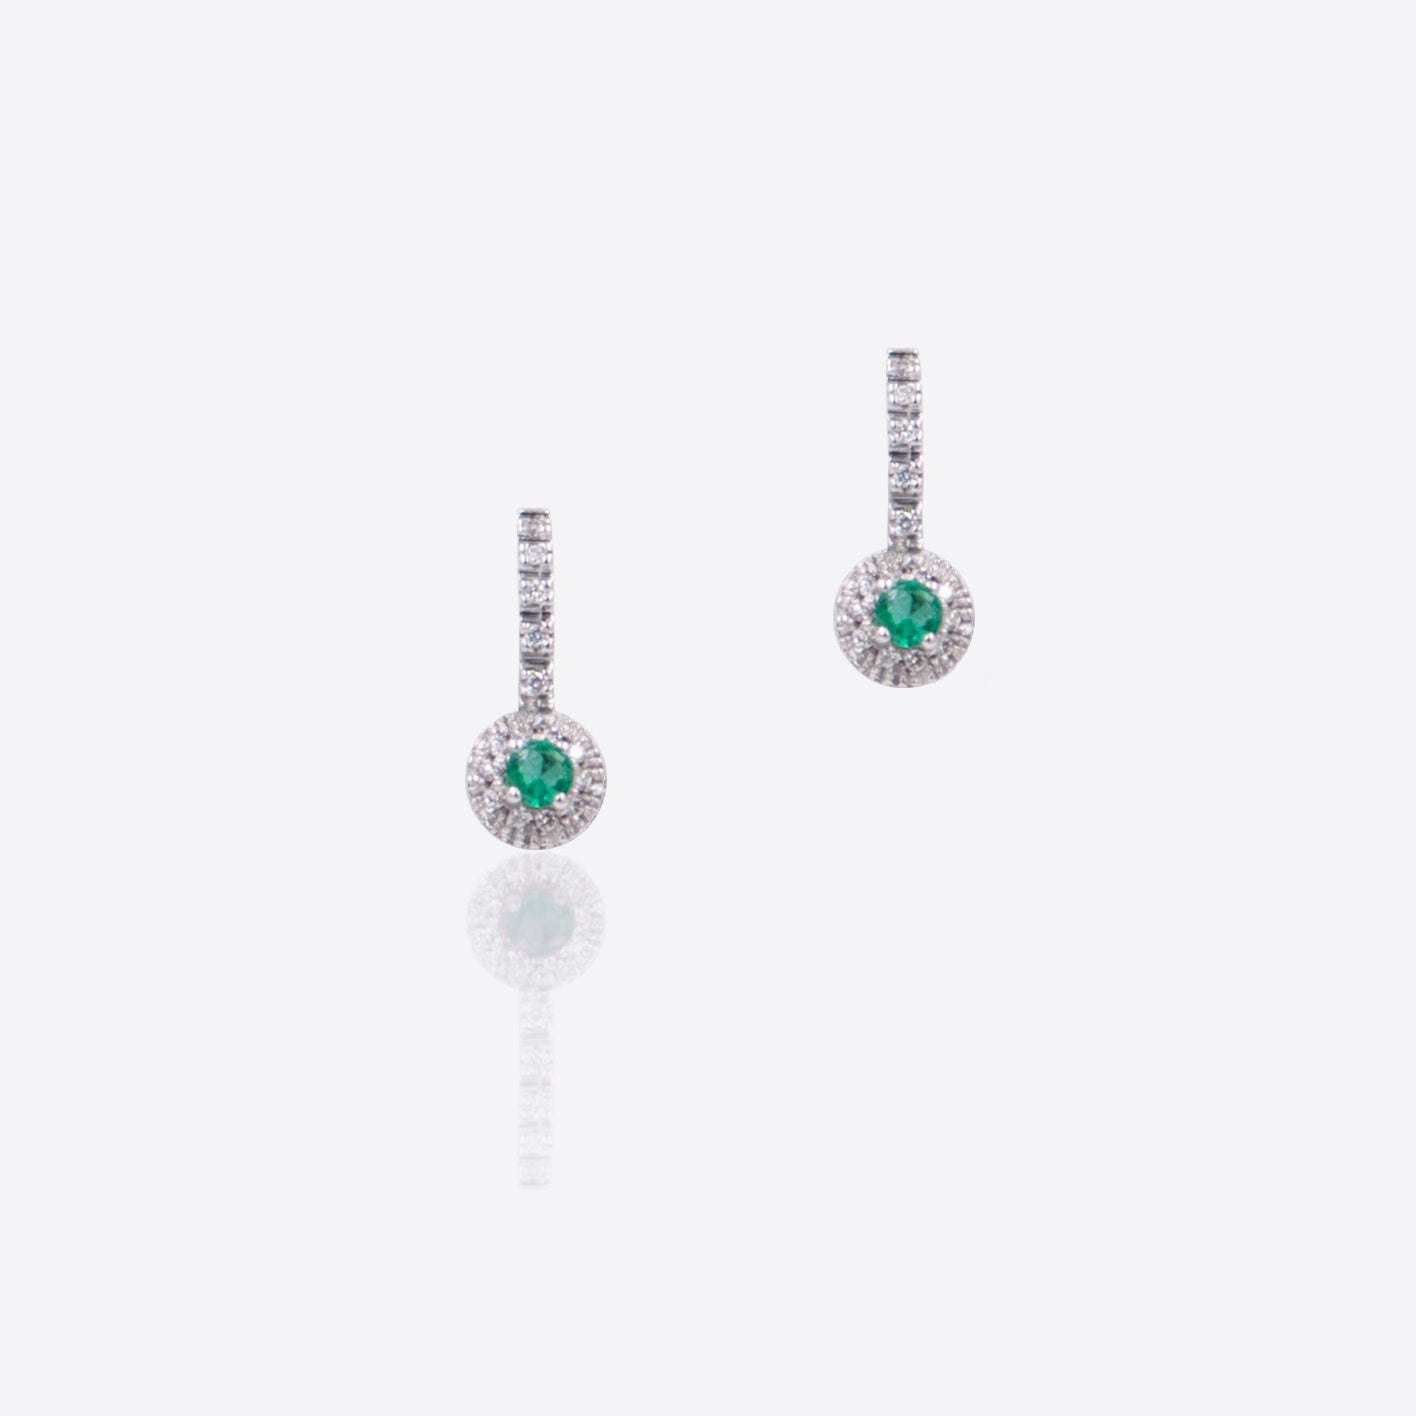 Round droplet earrings with central diamonds and emeralds